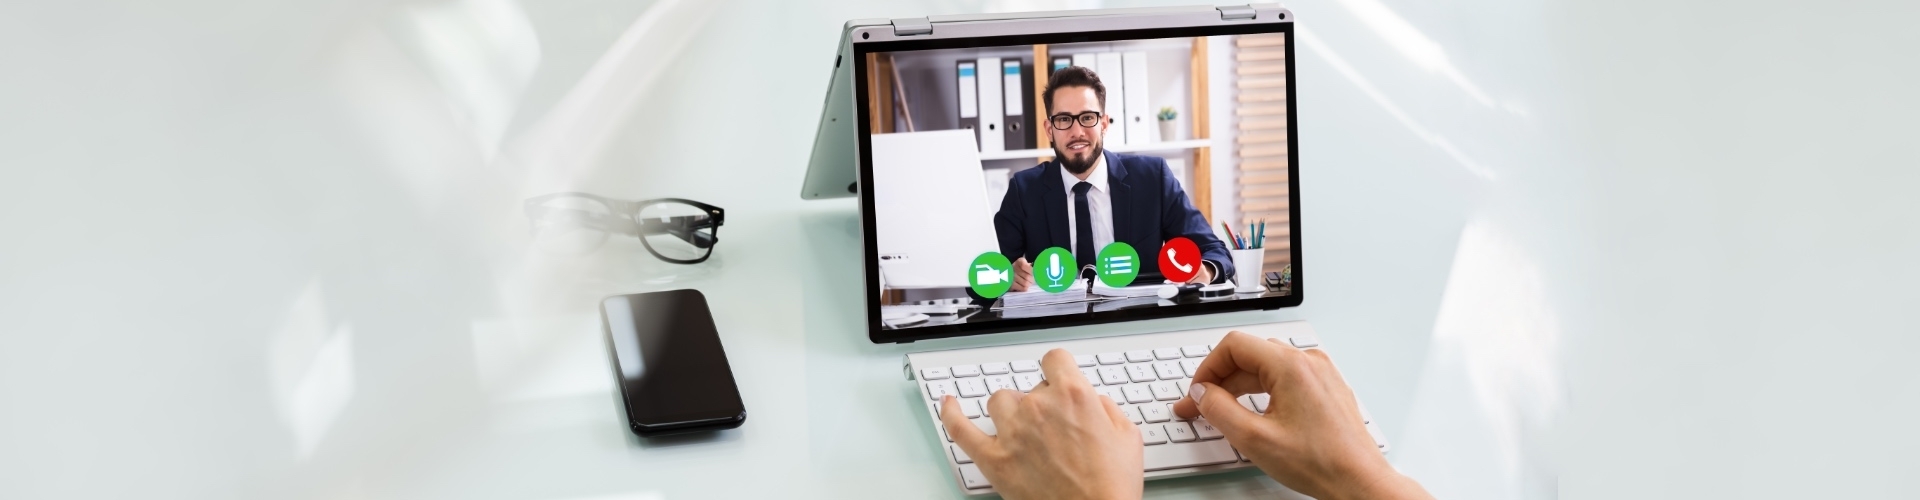 CRM coach helpt projectmanager in videocall